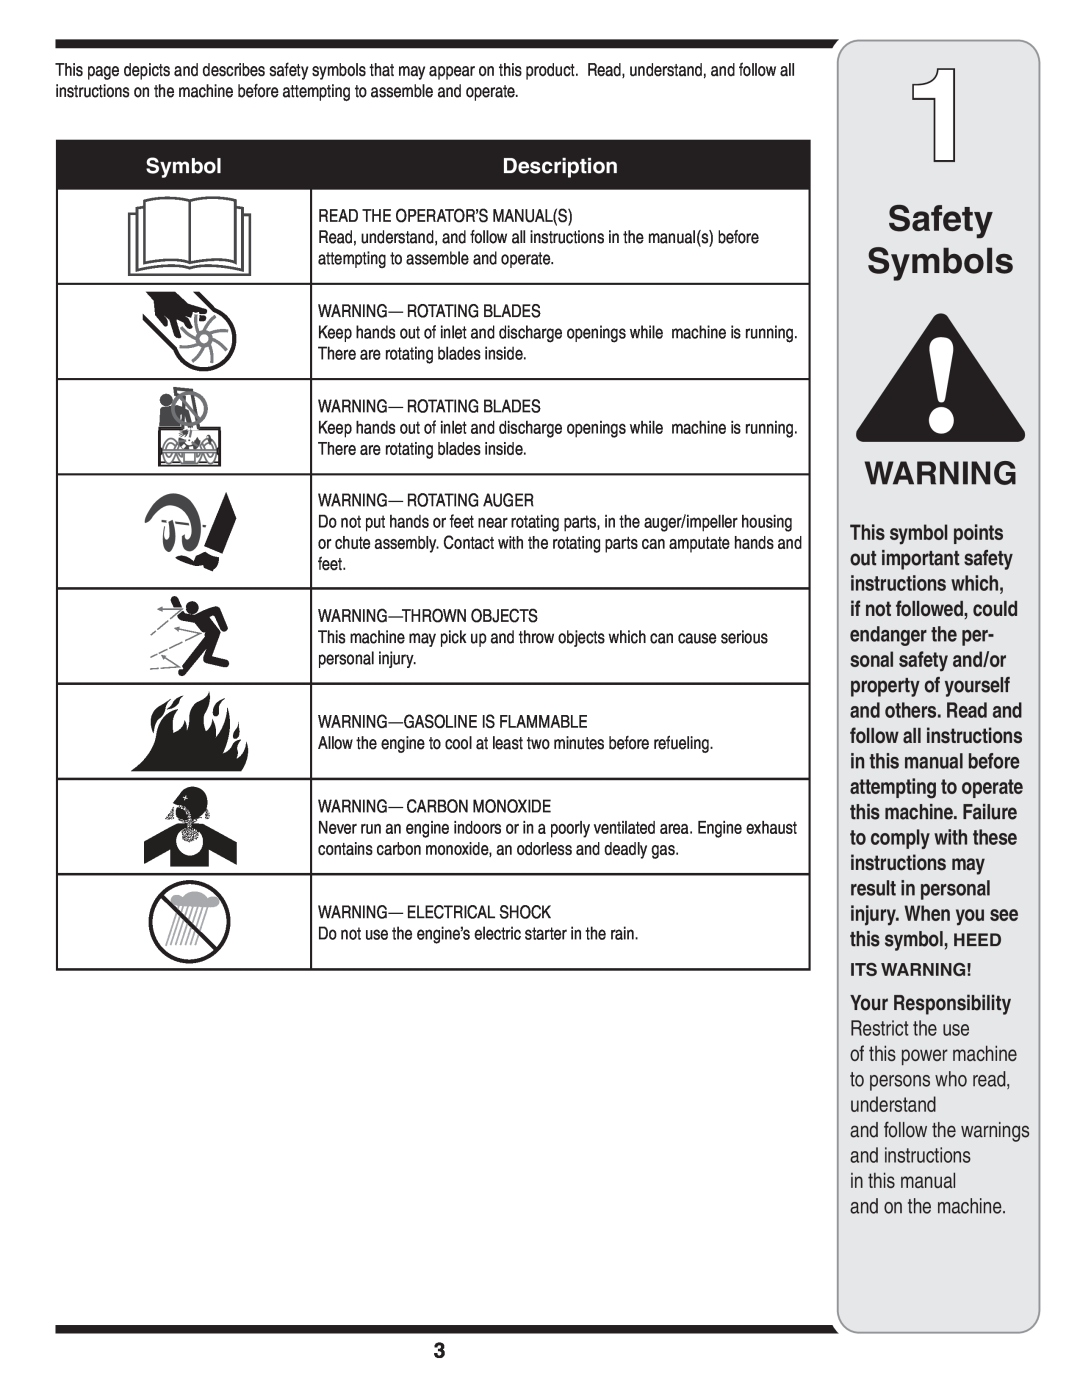 Bolens 31AE6GKF500 warranty Safety Symbols, Description, ITS WARNING Your Responsibility Restrict the use 